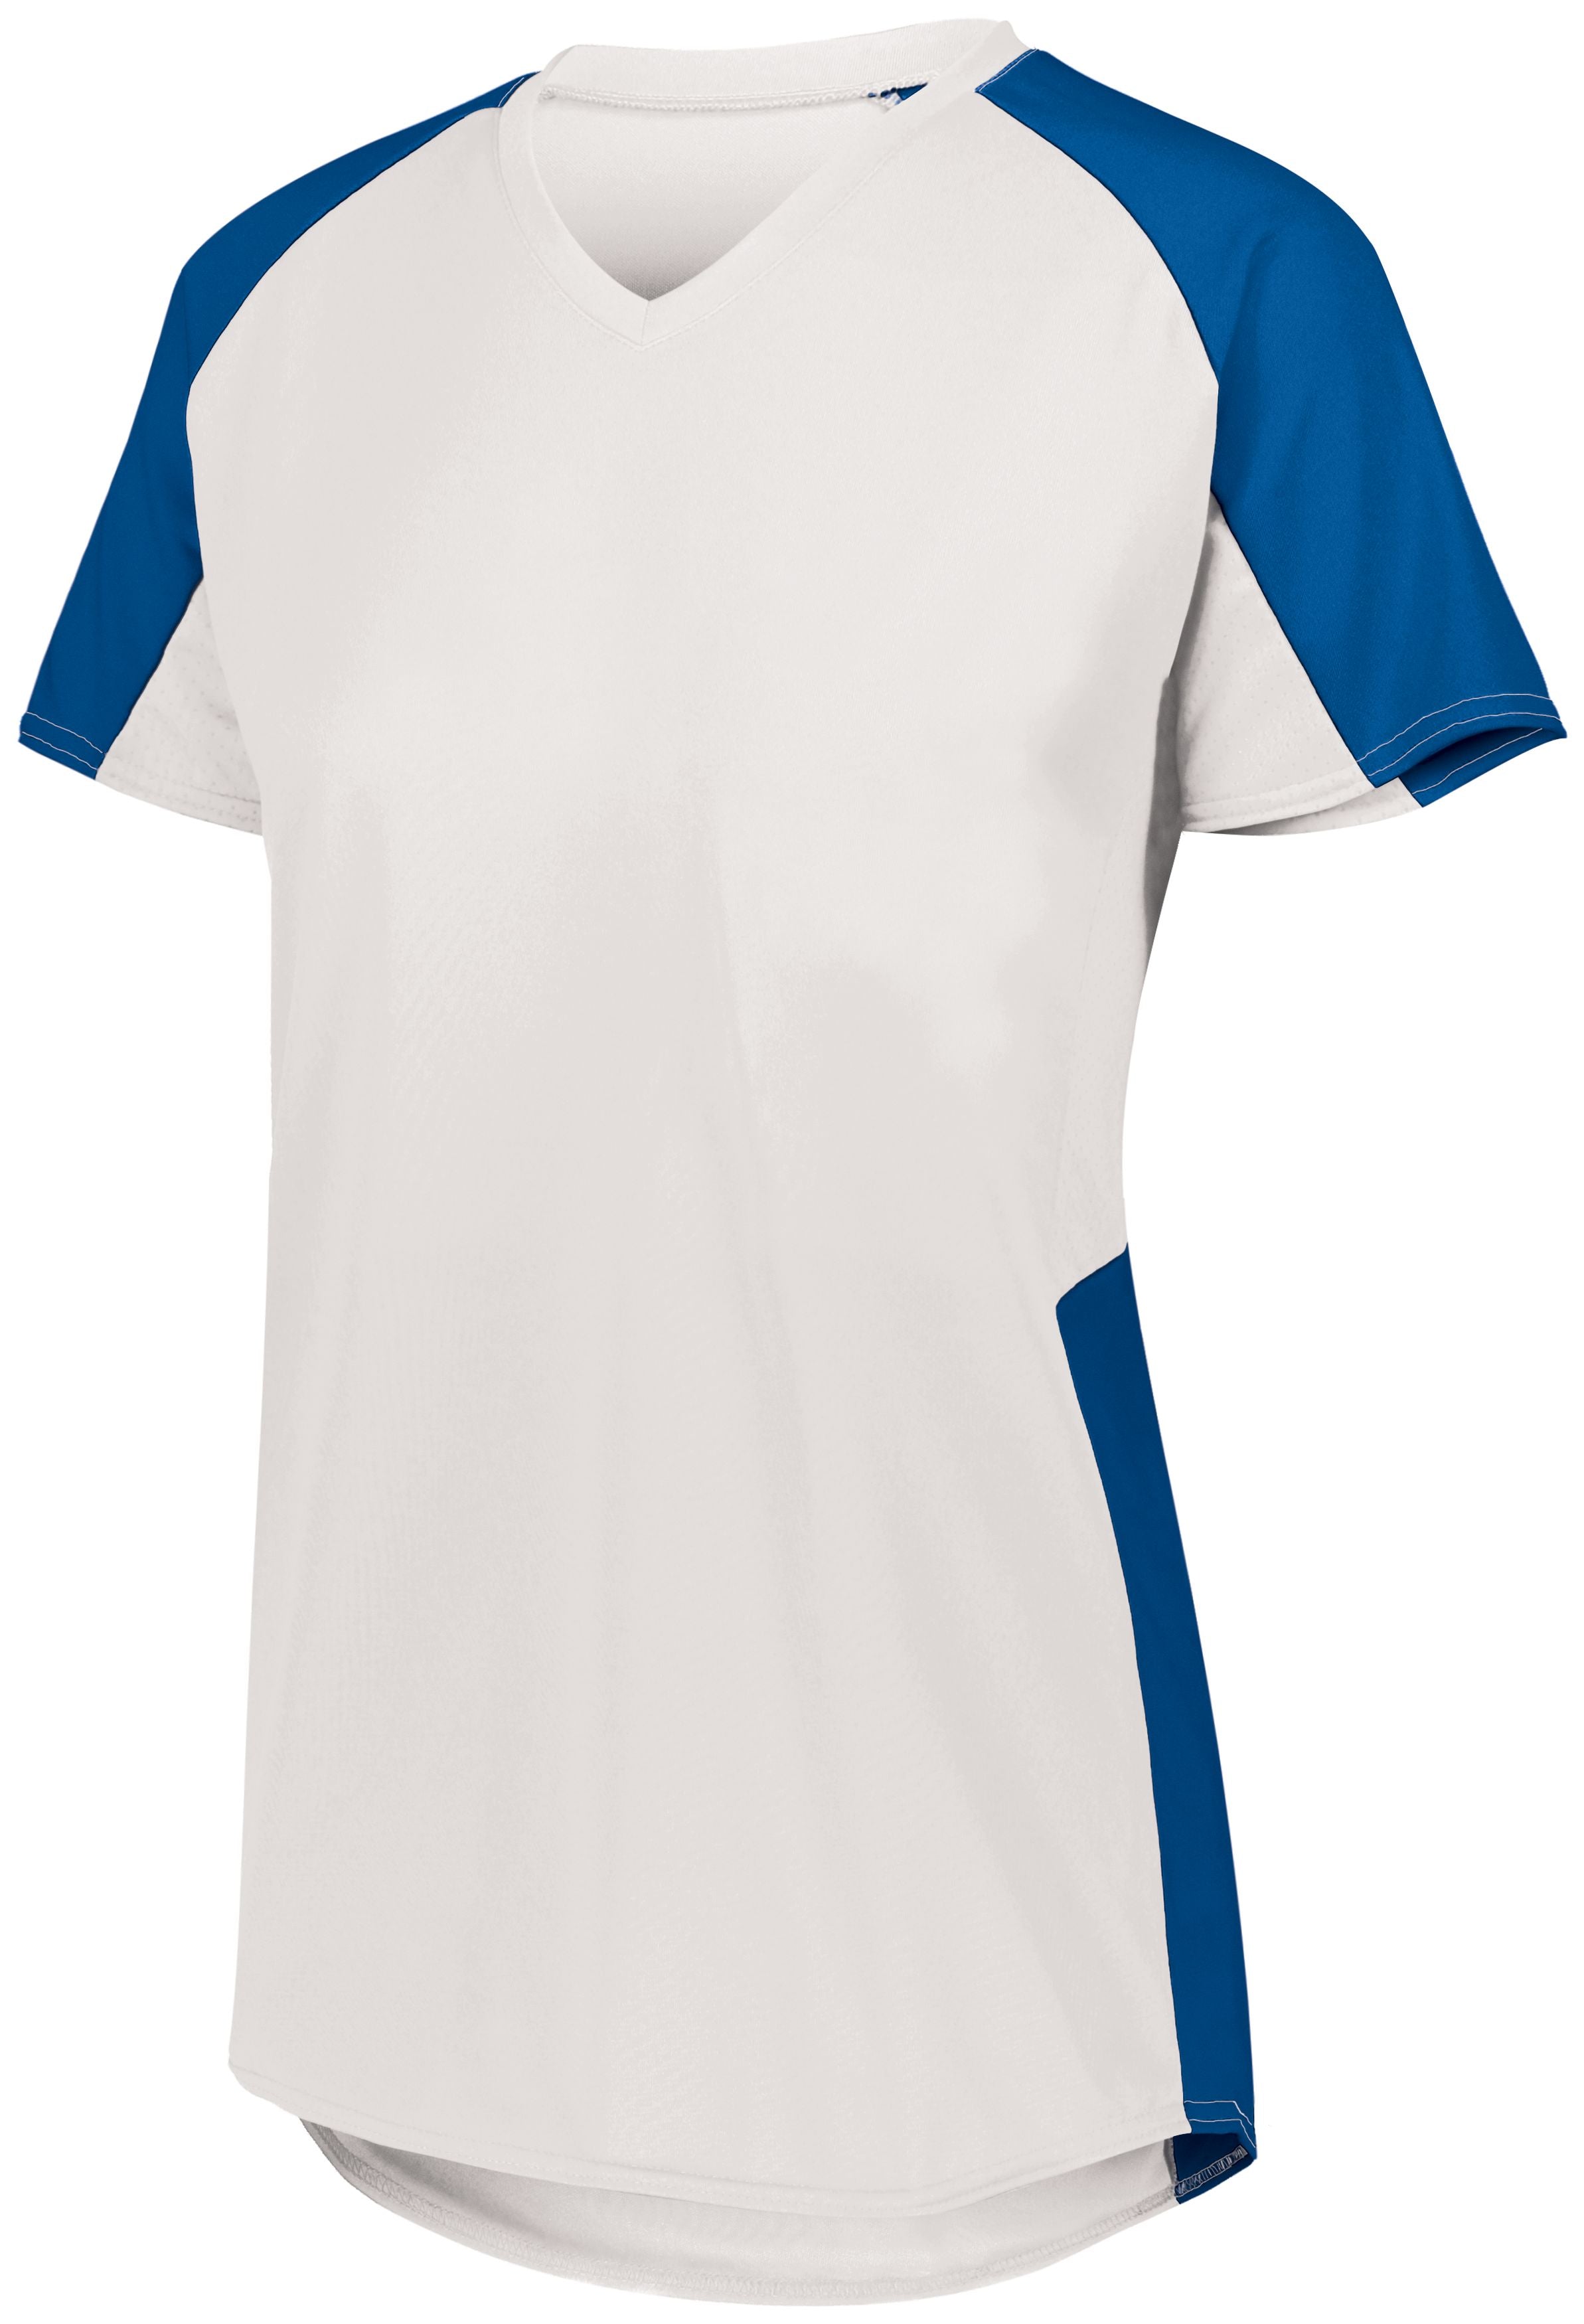 Augusta Sportswear Girls Cutter Jersey in White/Royal  -Part of the Girls, Augusta-Products, Softball, Girls-Jersey, Shirts product lines at KanaleyCreations.com